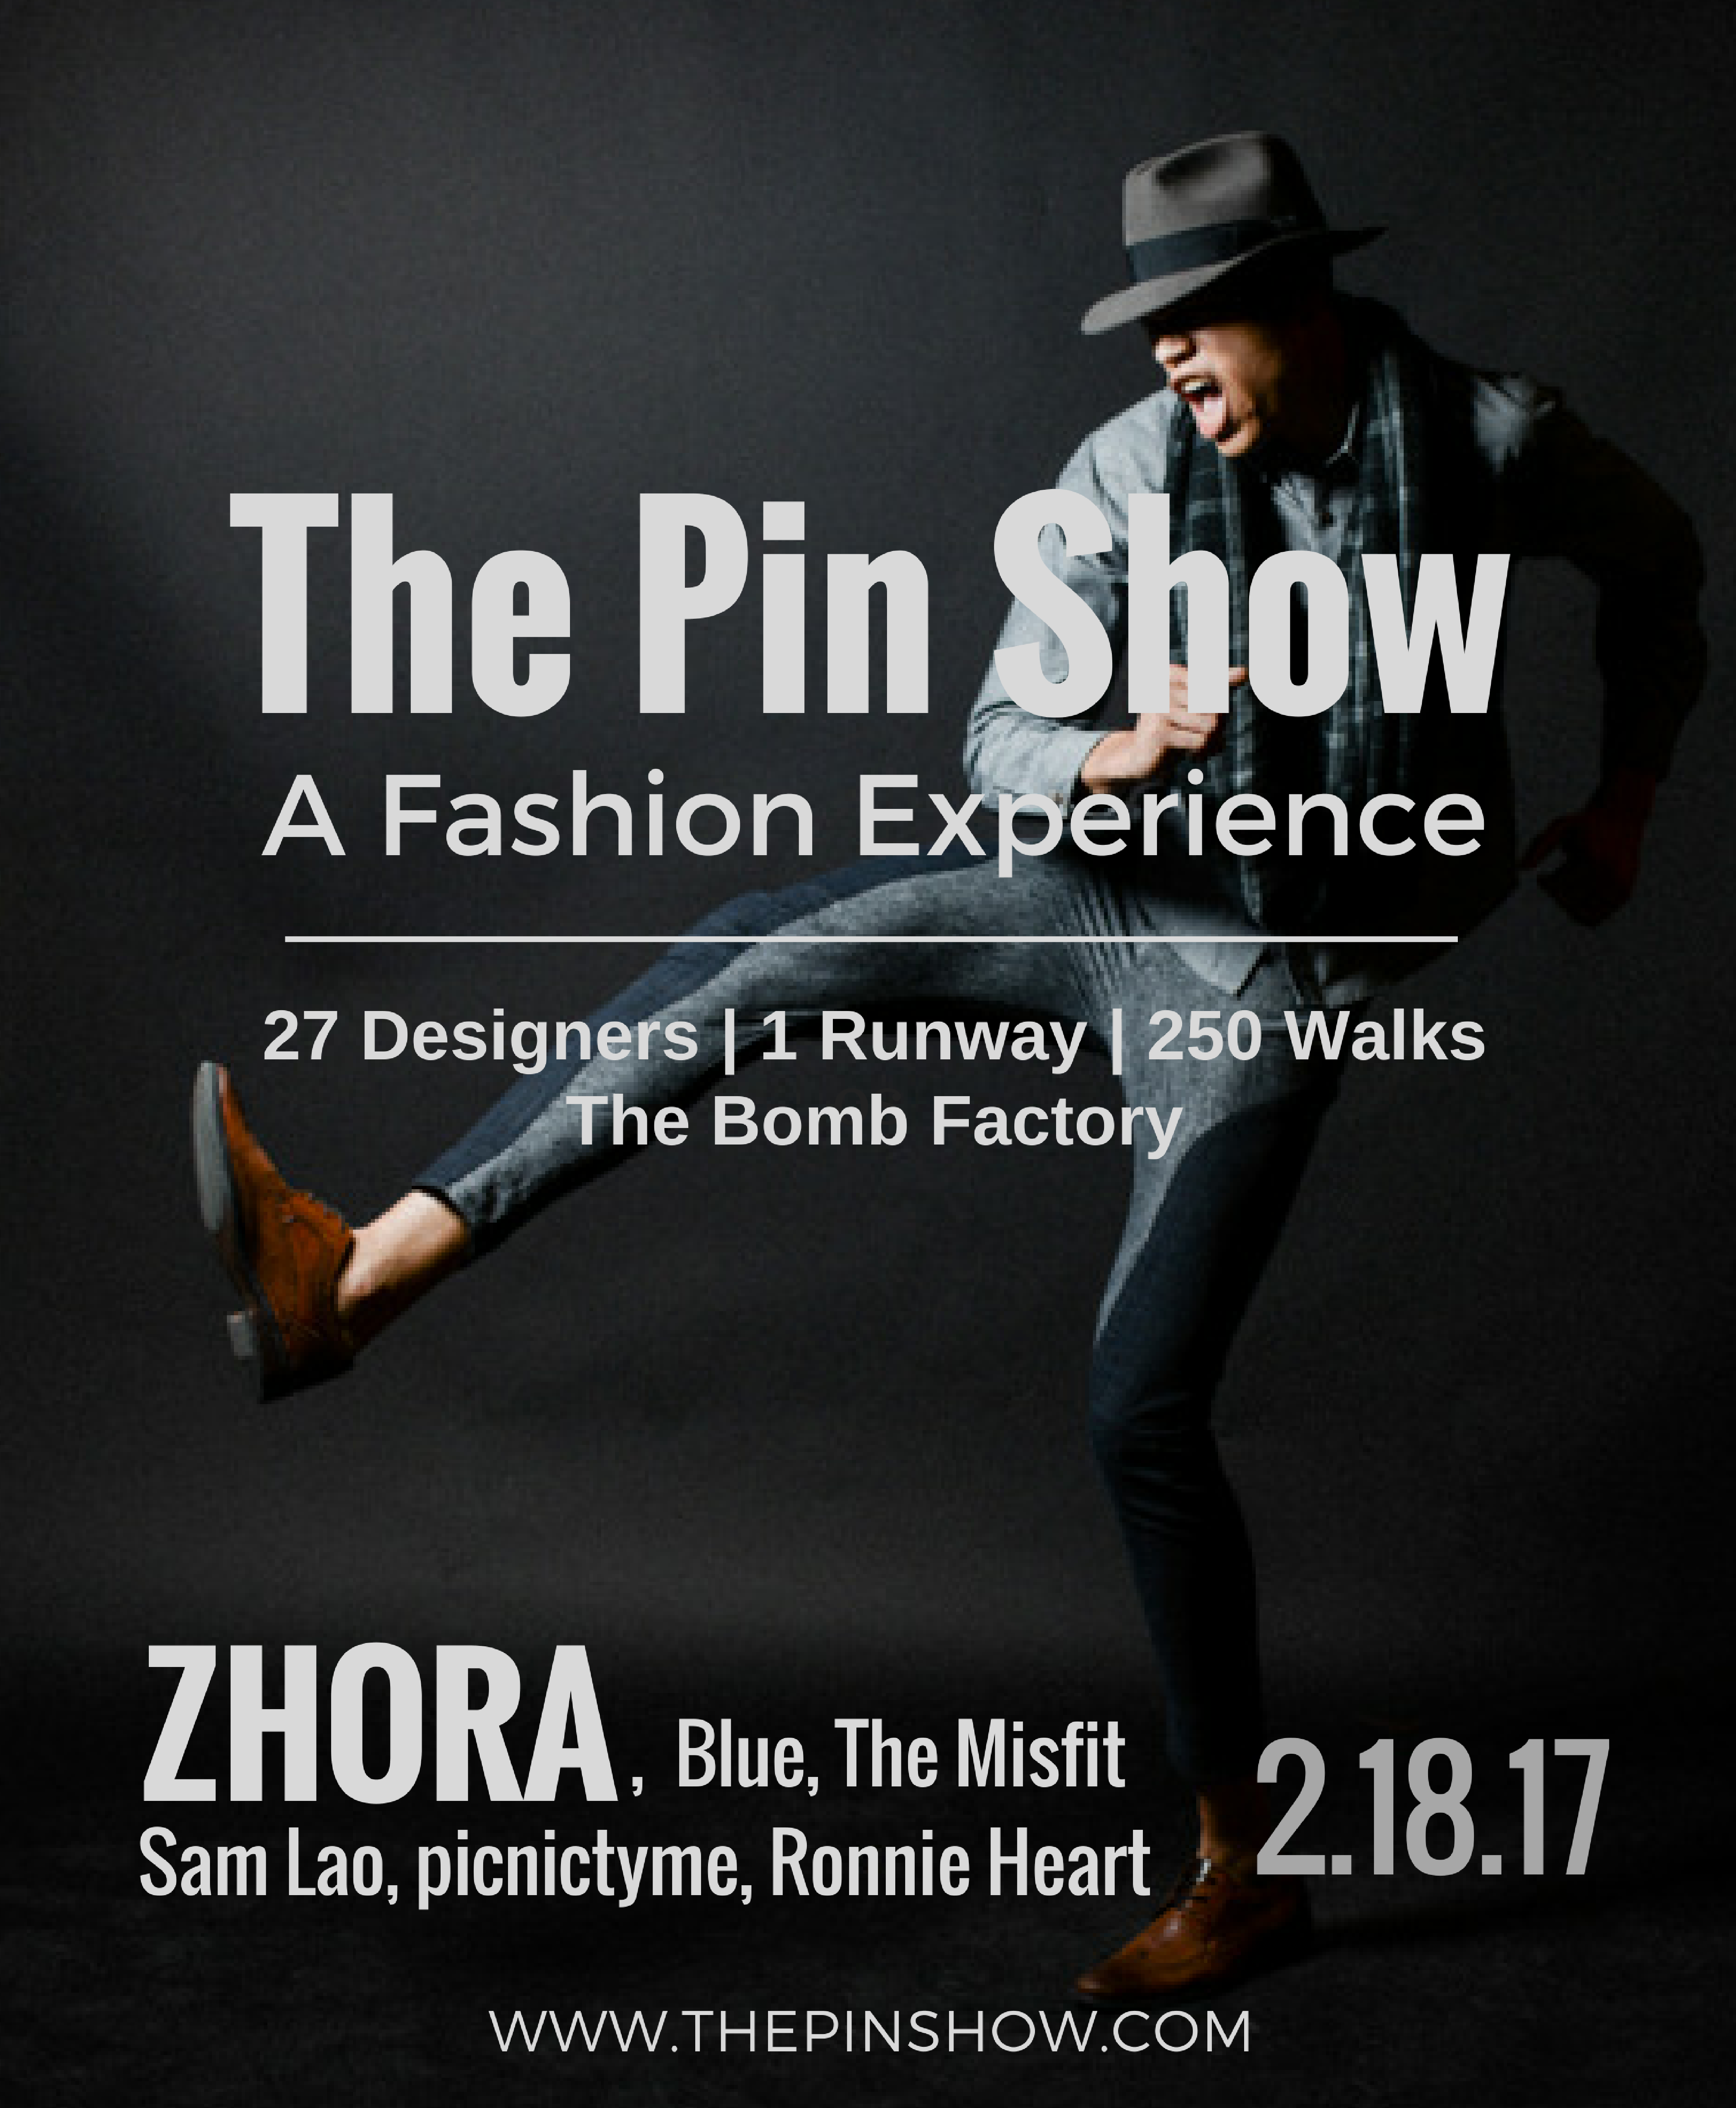 The Pin Show 2017 (Image courtesy of The Pin Show)